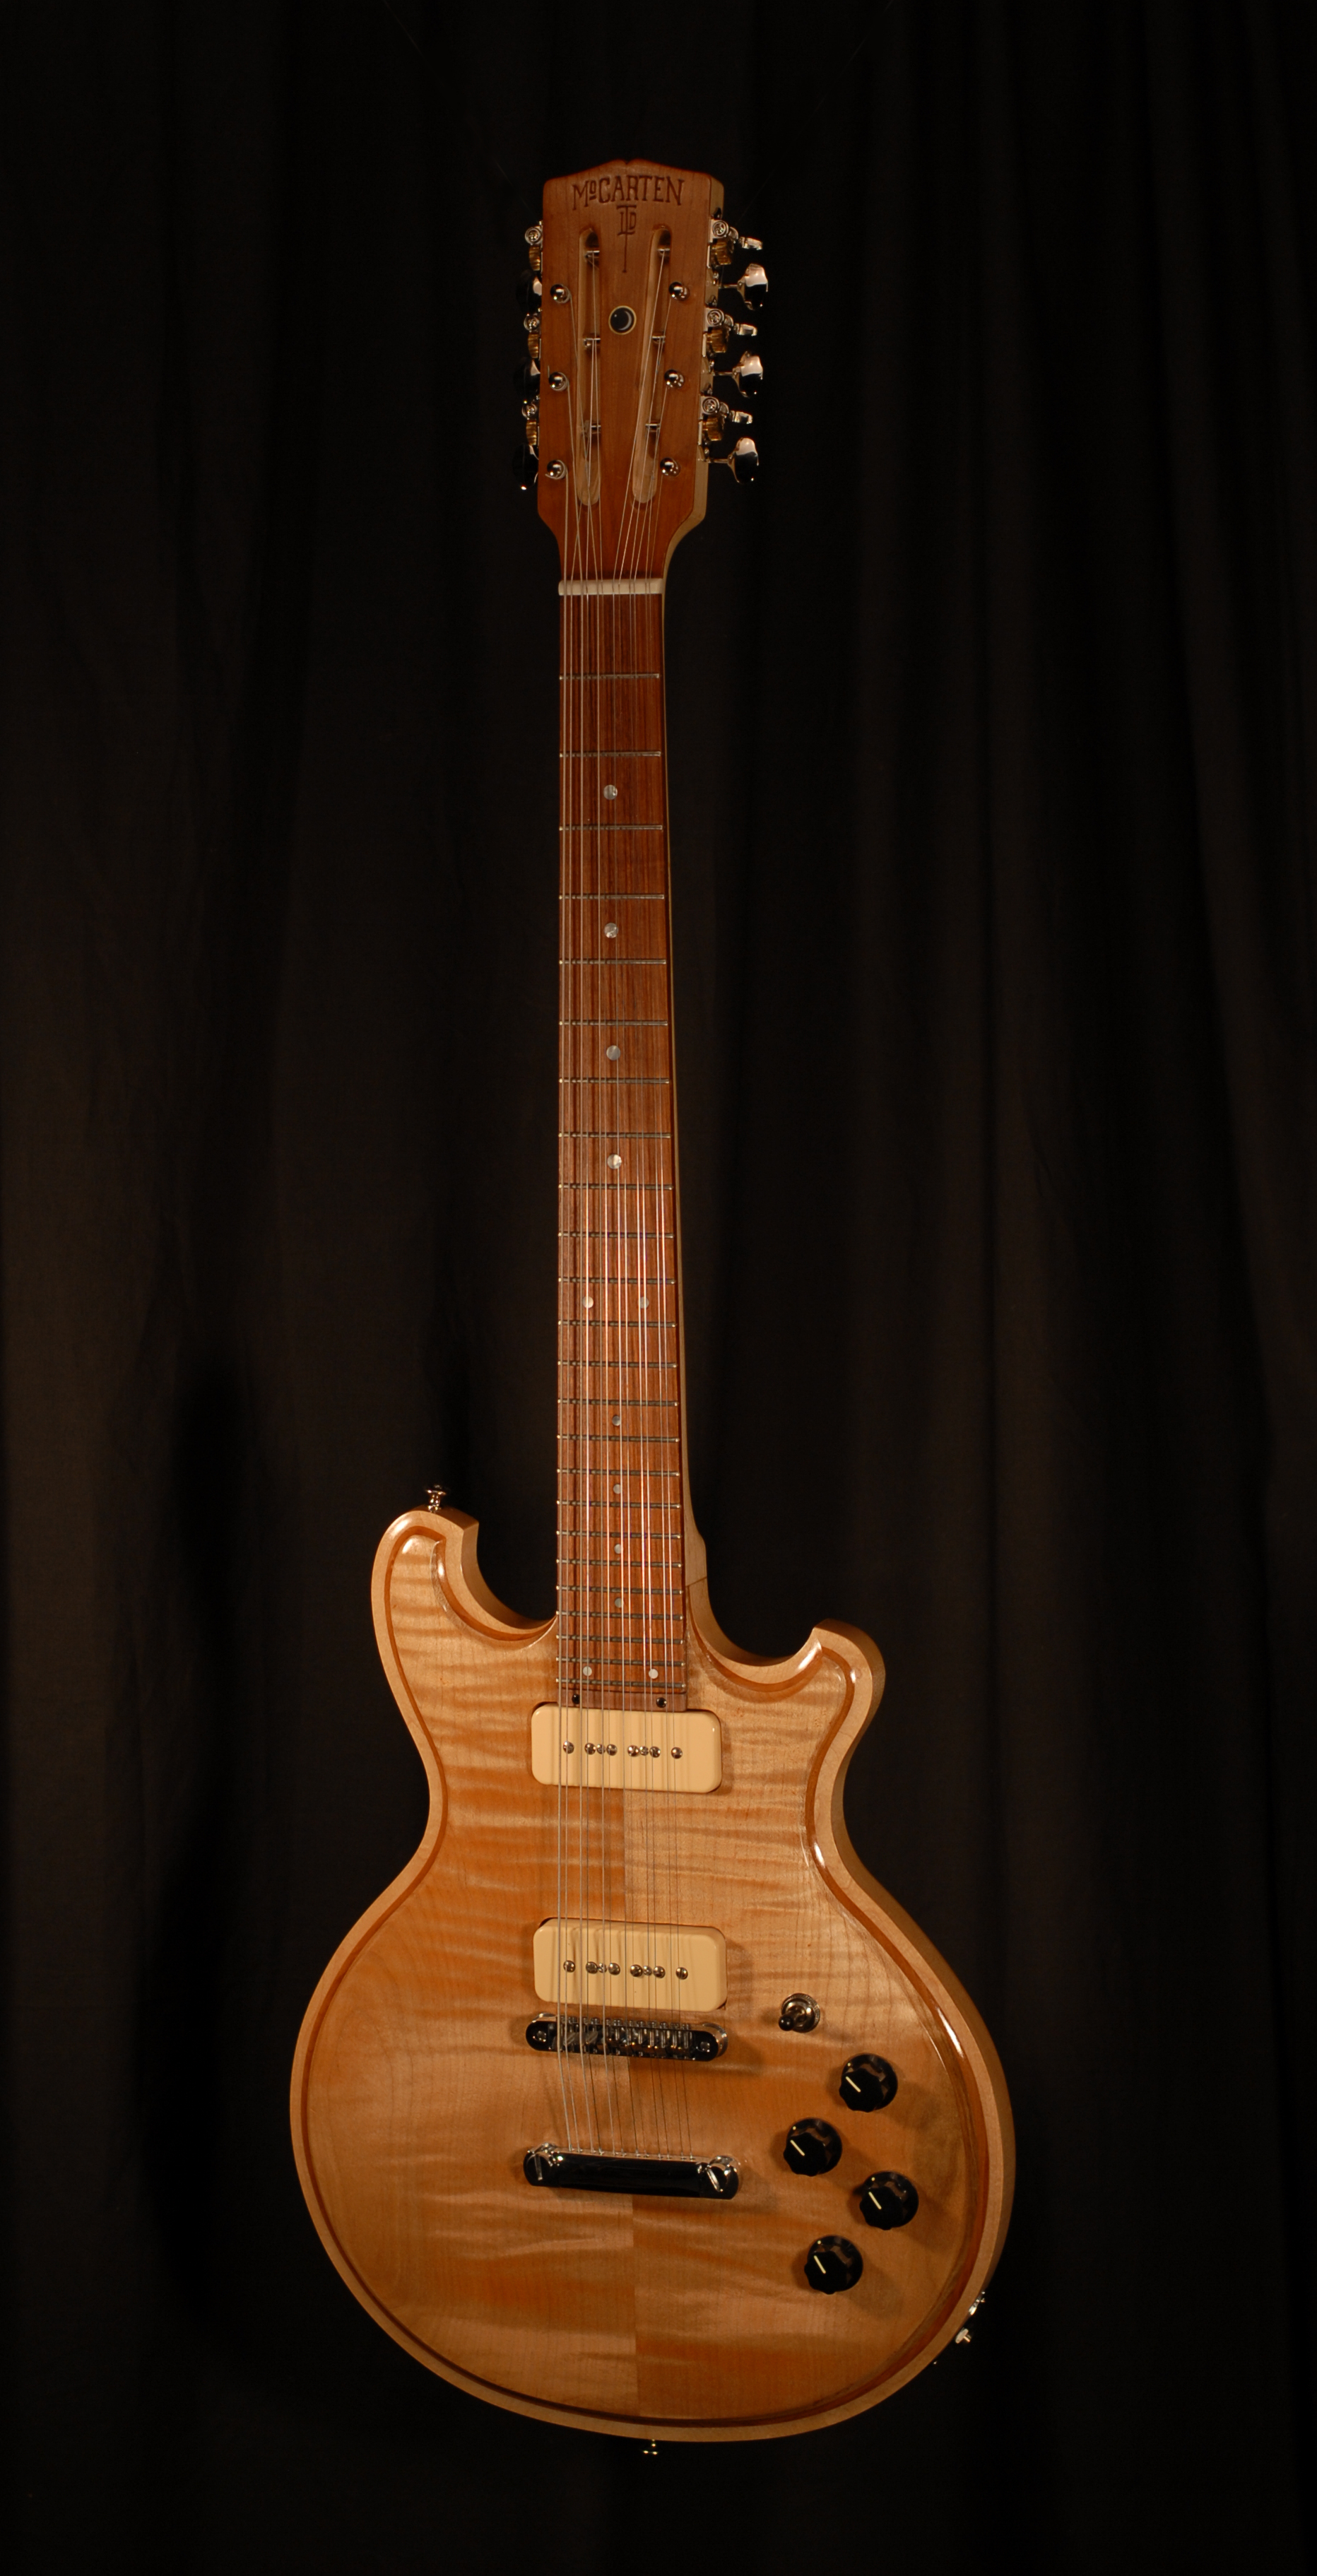 front view of michael mccarten's double cutaway Electric 12 string guitar model